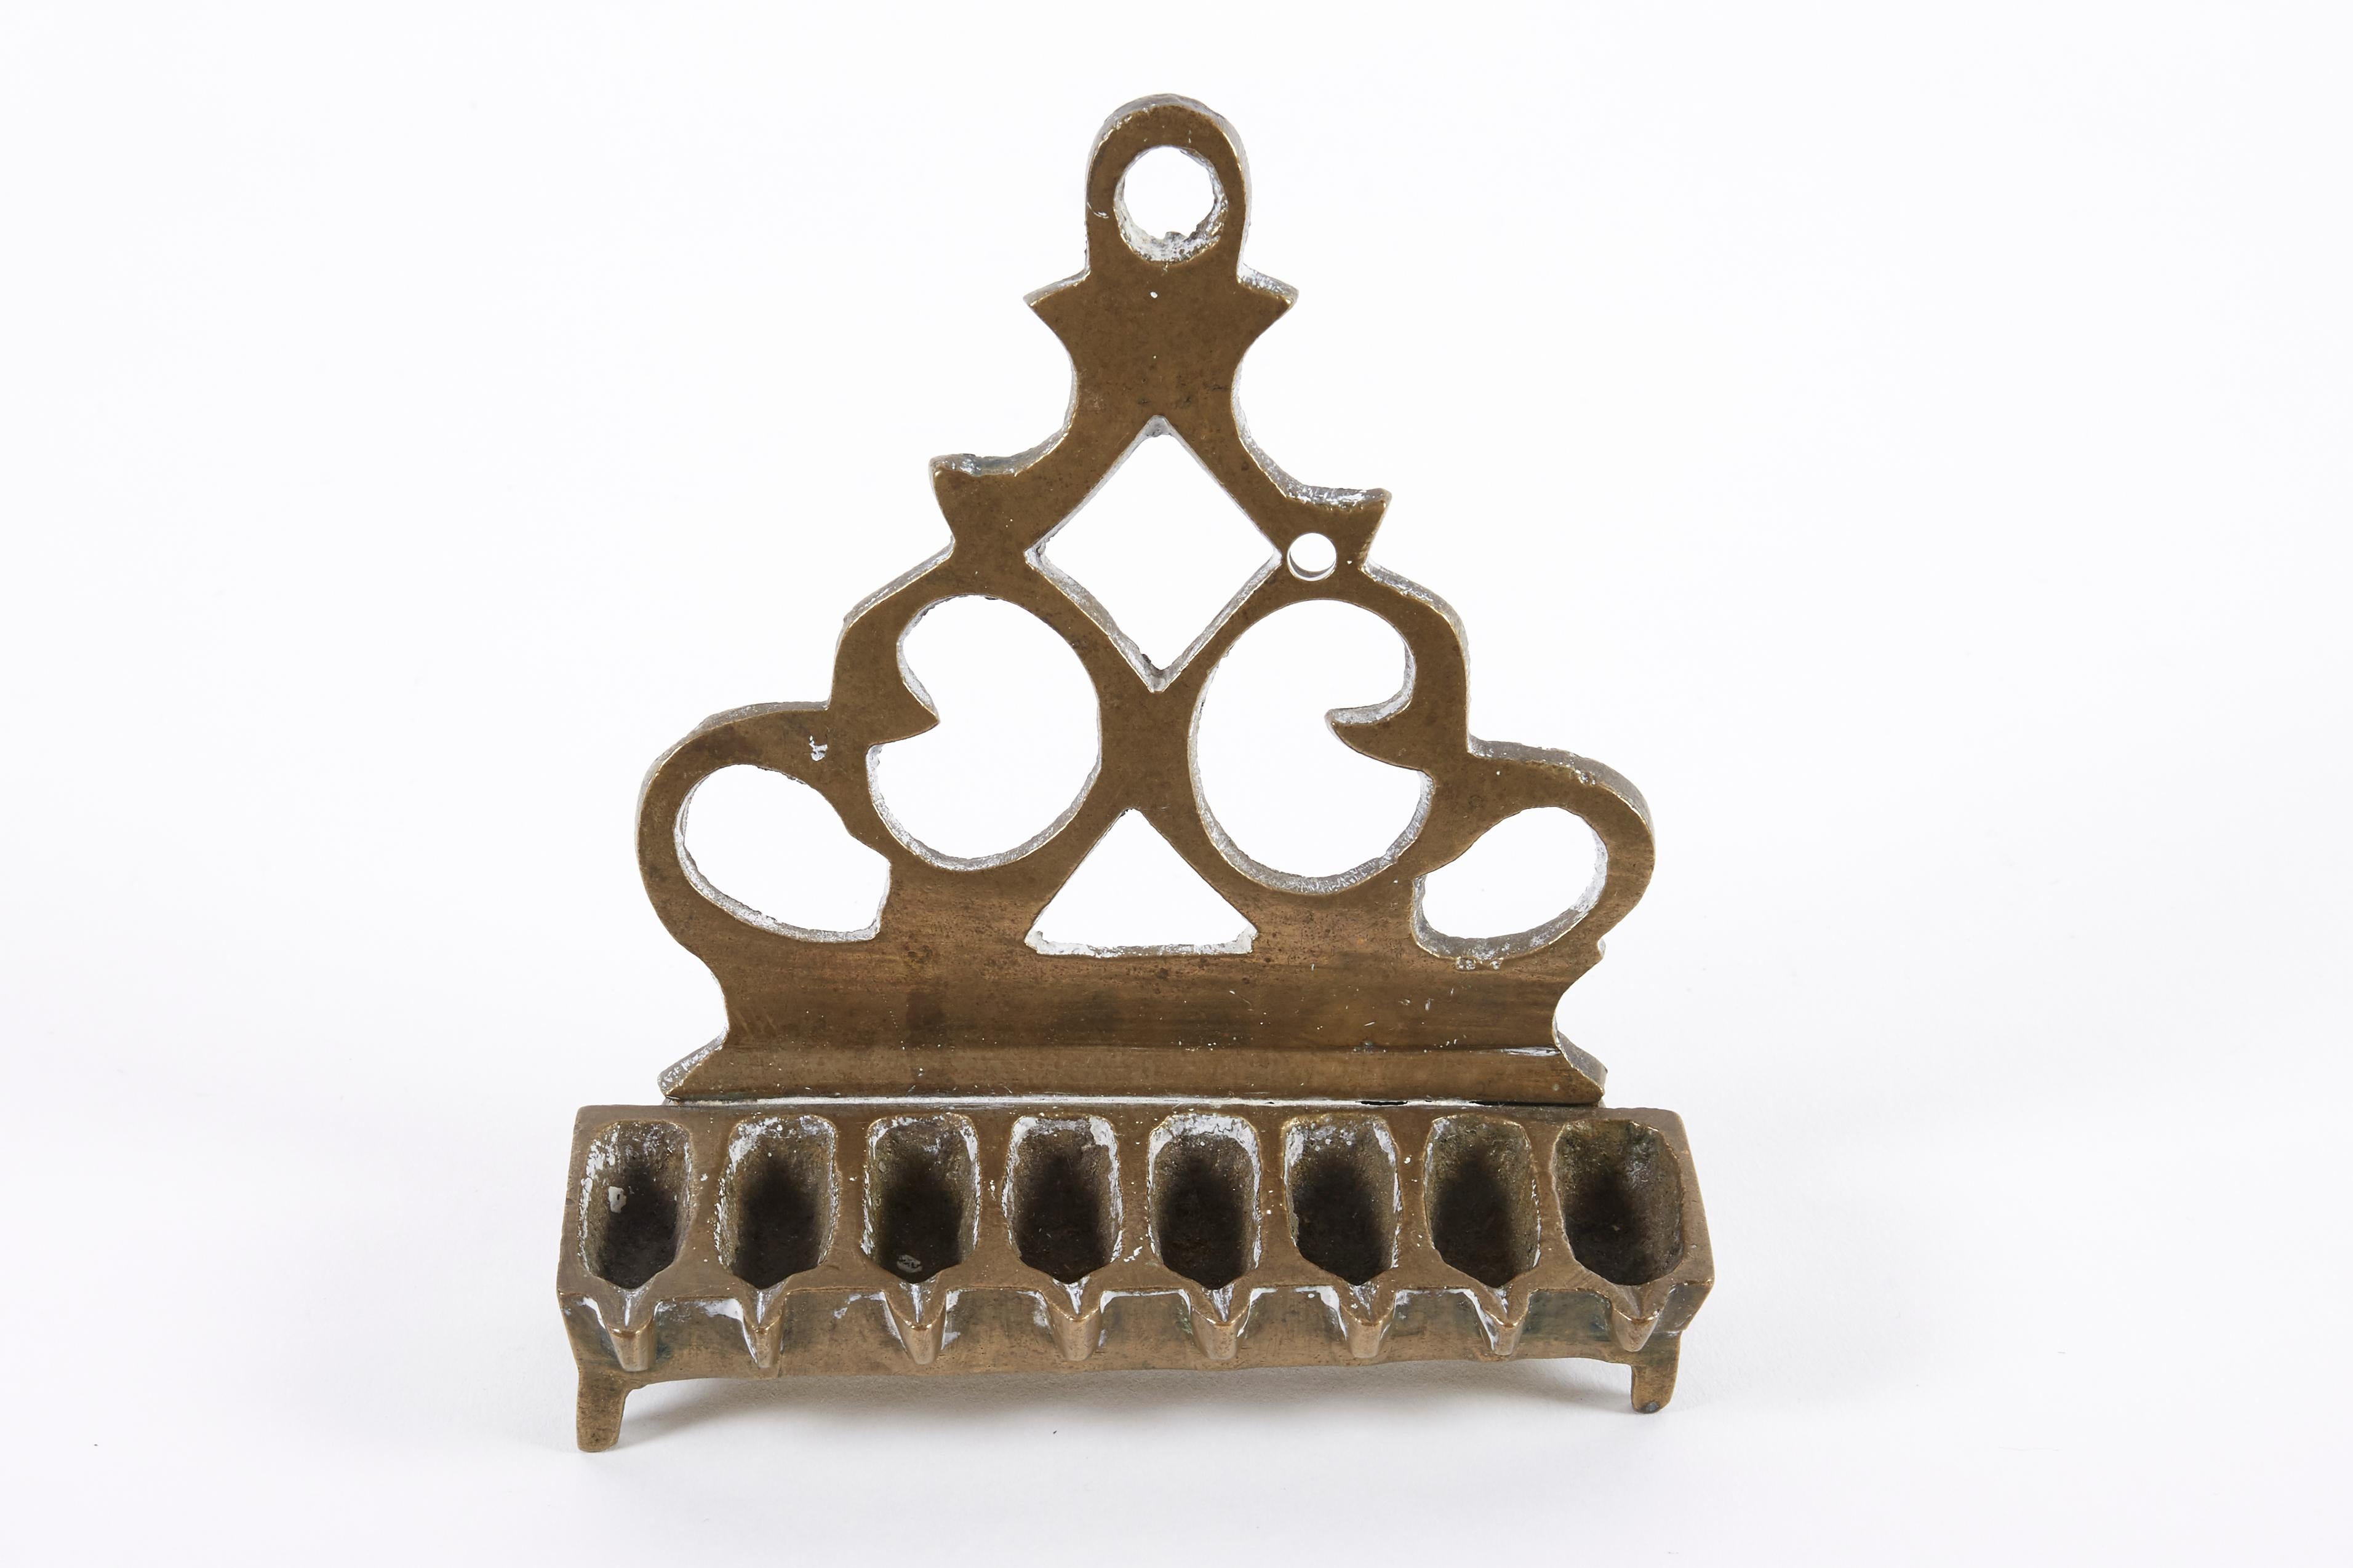 Brass Hanukkah lamp Menorah, Poland, circa 1810. 
Cast in Bench form, on four feet. The backplate is cast and pierced featuring scrollwork.
This lamp was made by the technique known as 